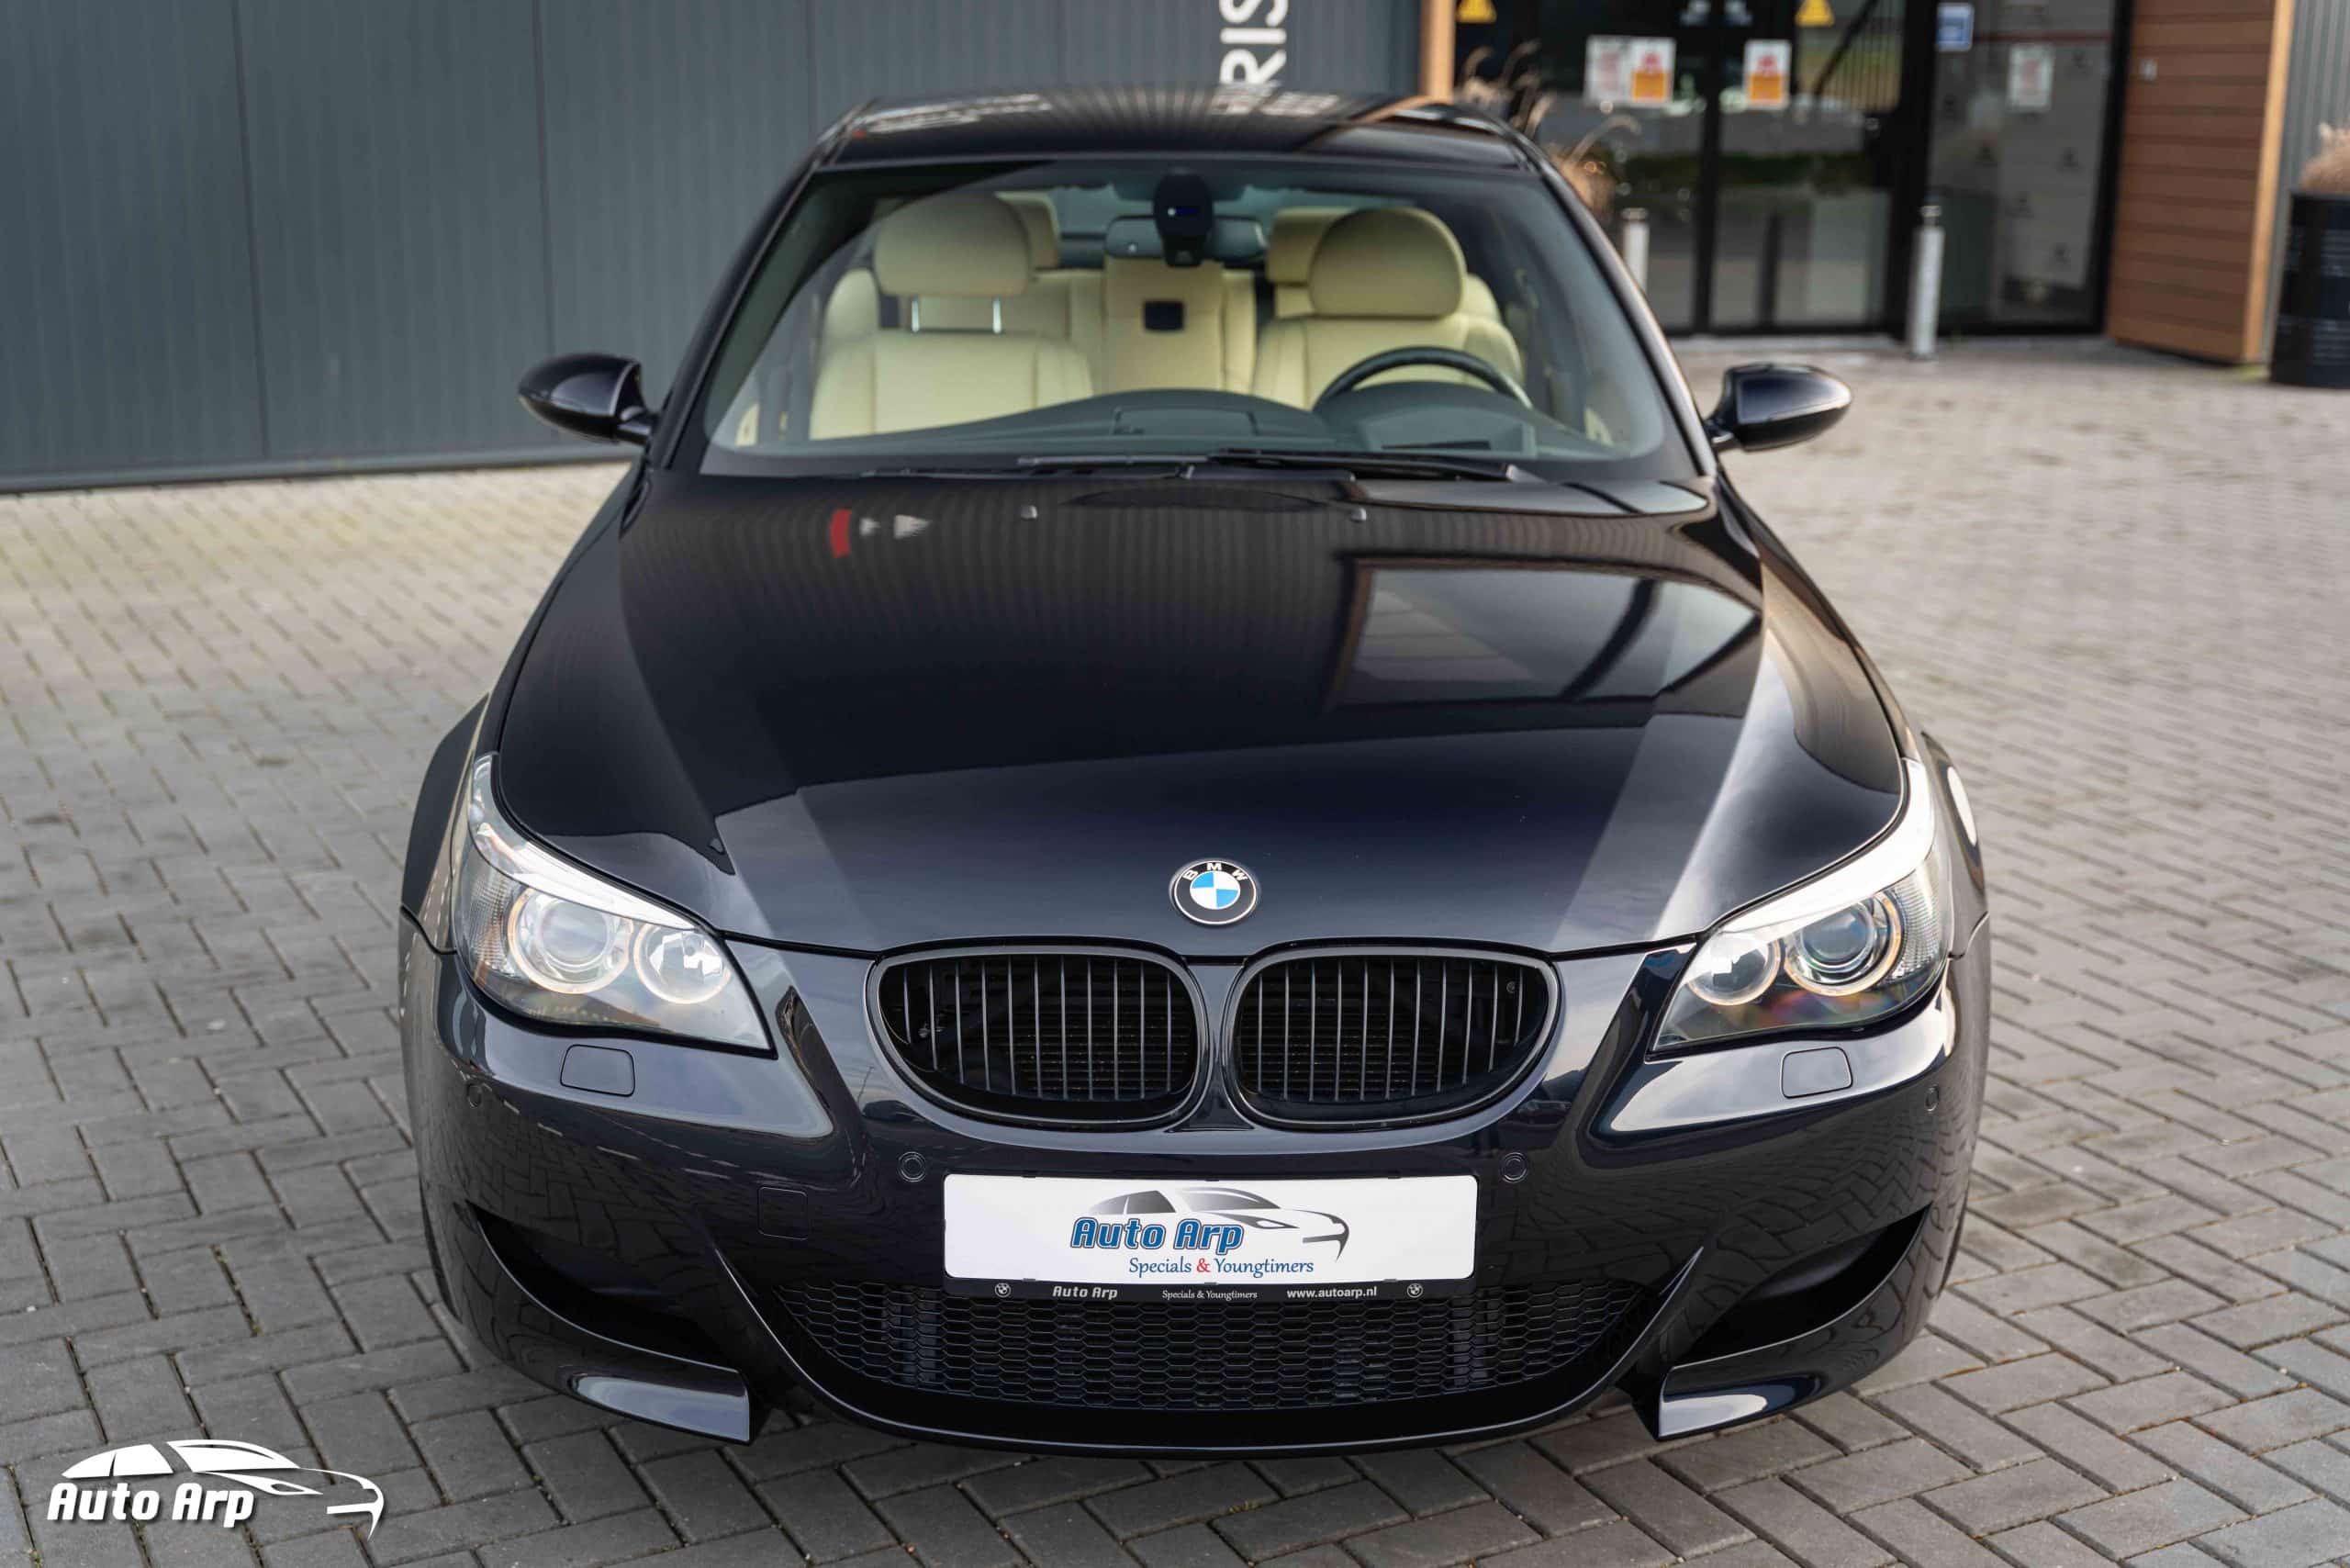 BMW E60 M5 Facelift in perfect condition